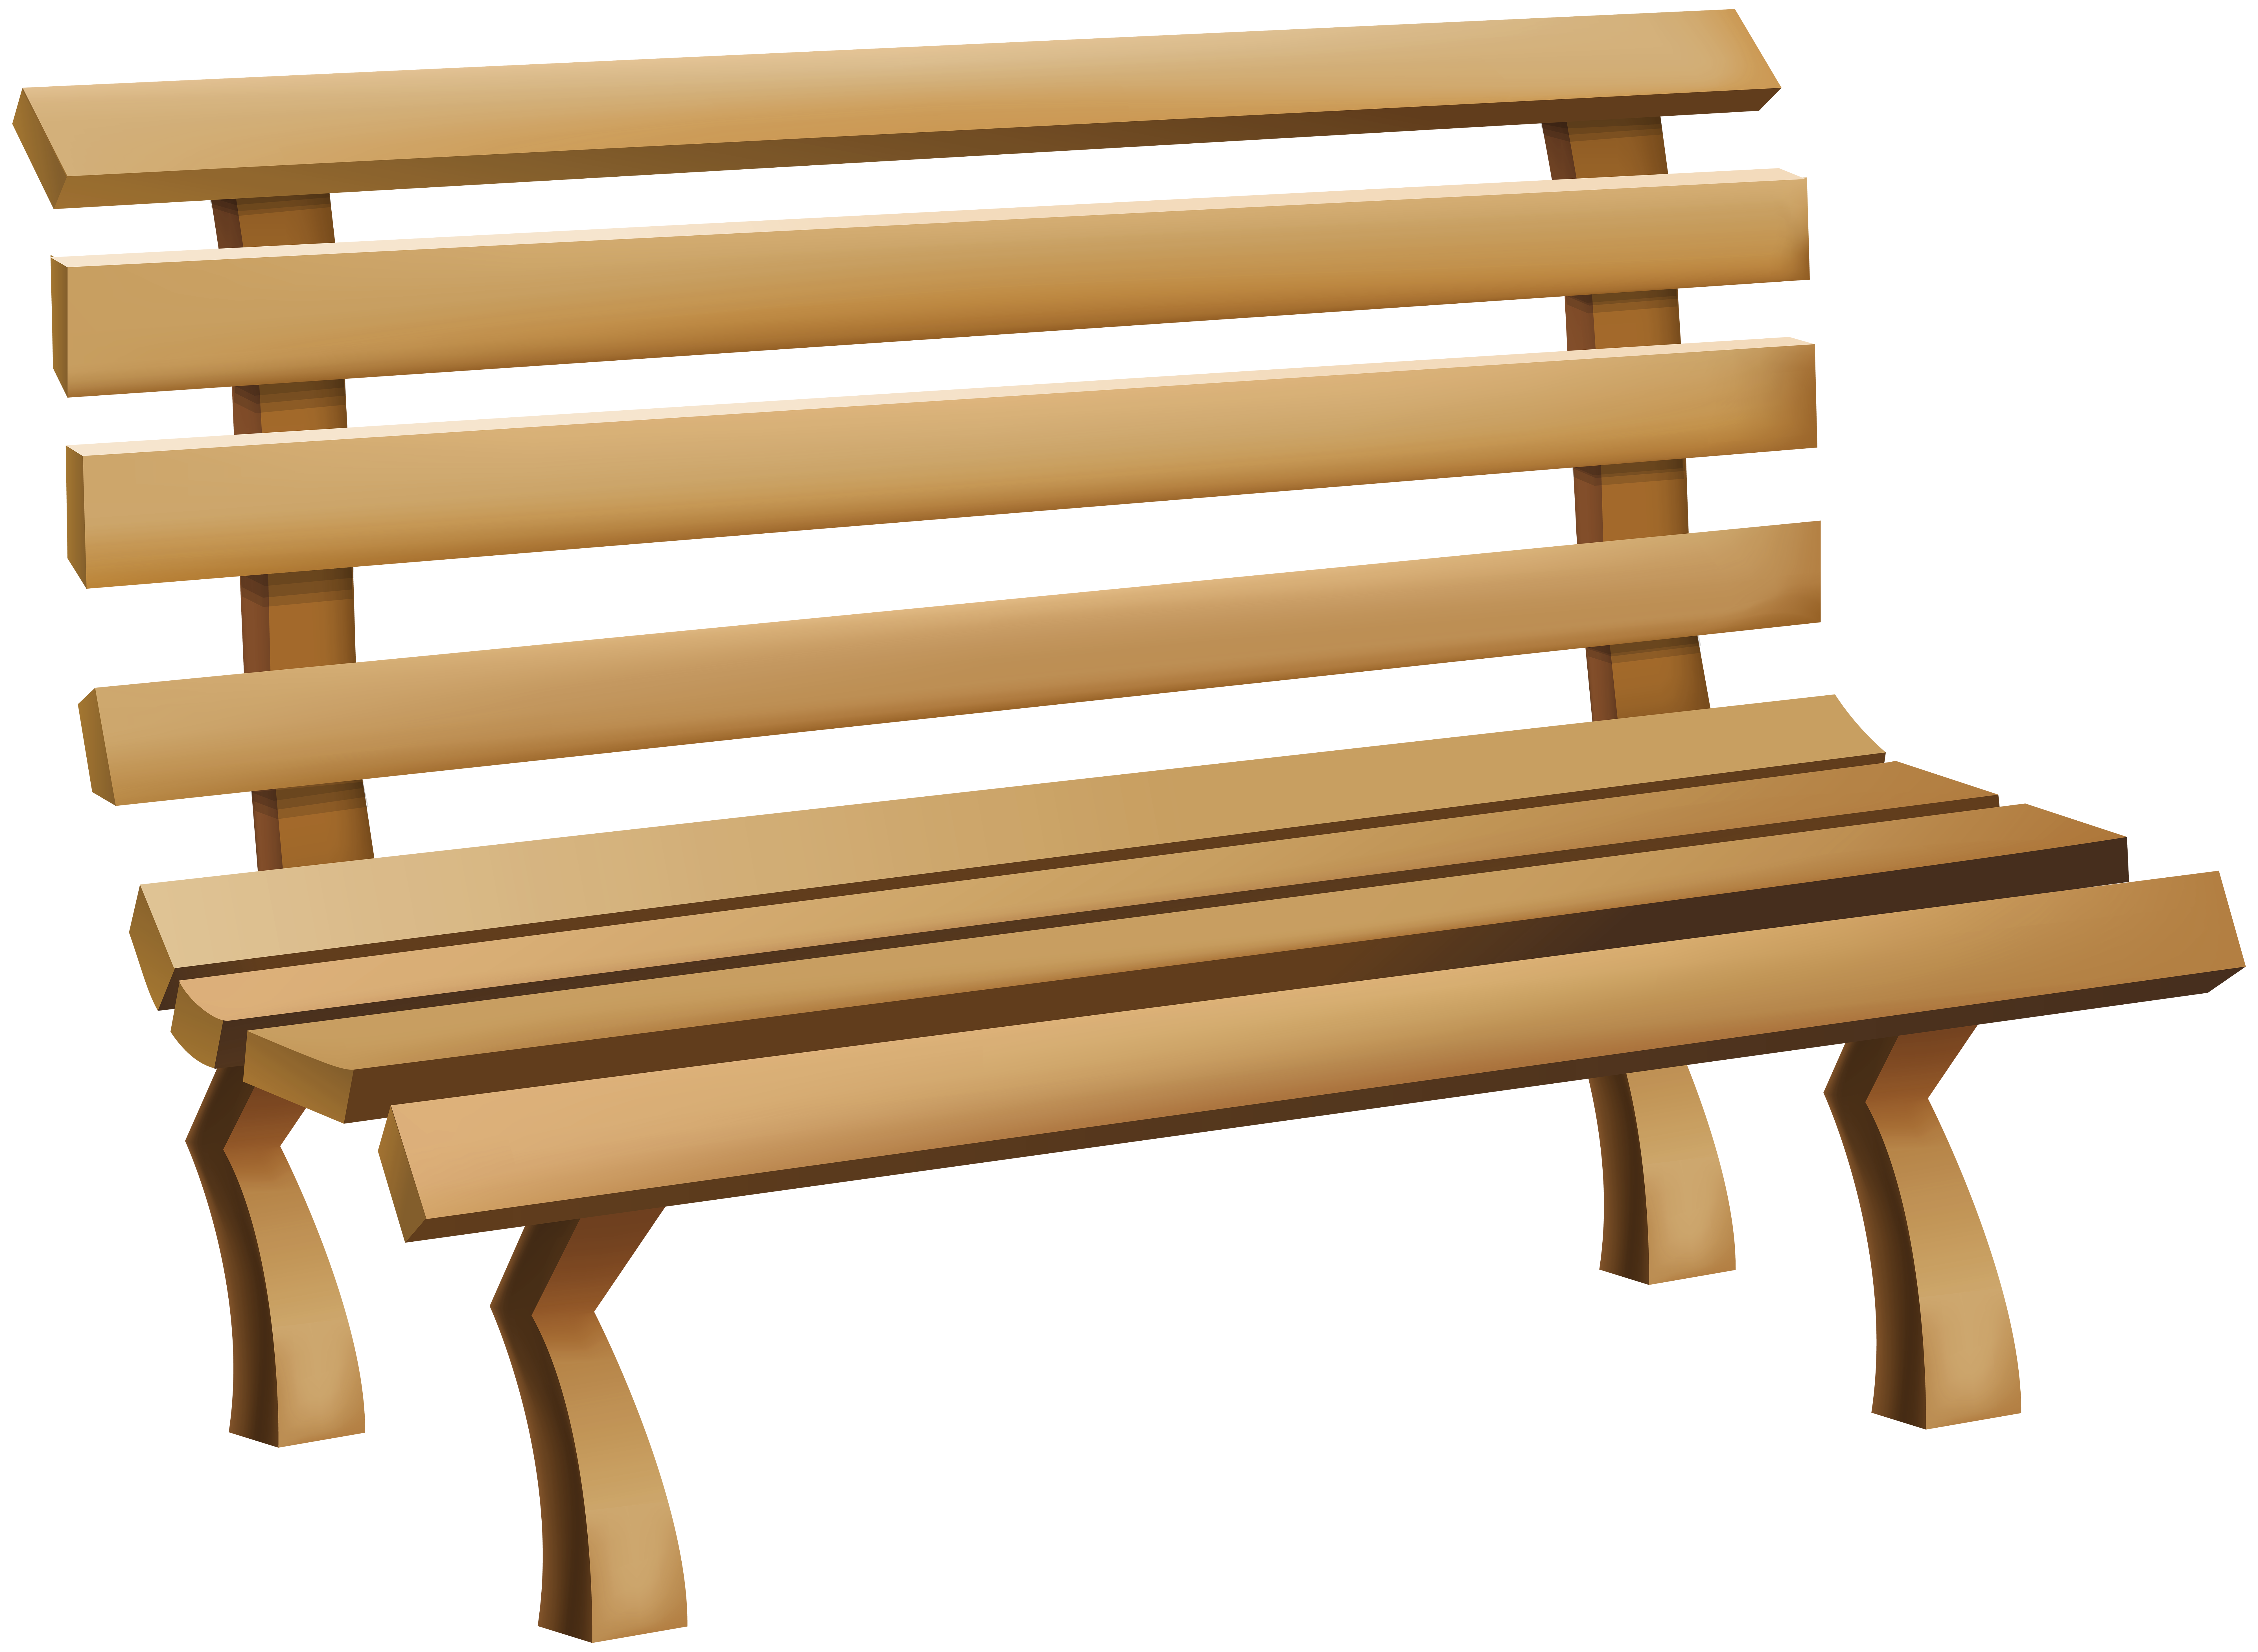 Bench Png Clip Art Image Gallery Yopriceville High Quality Images And Transparent Png Free Clipart